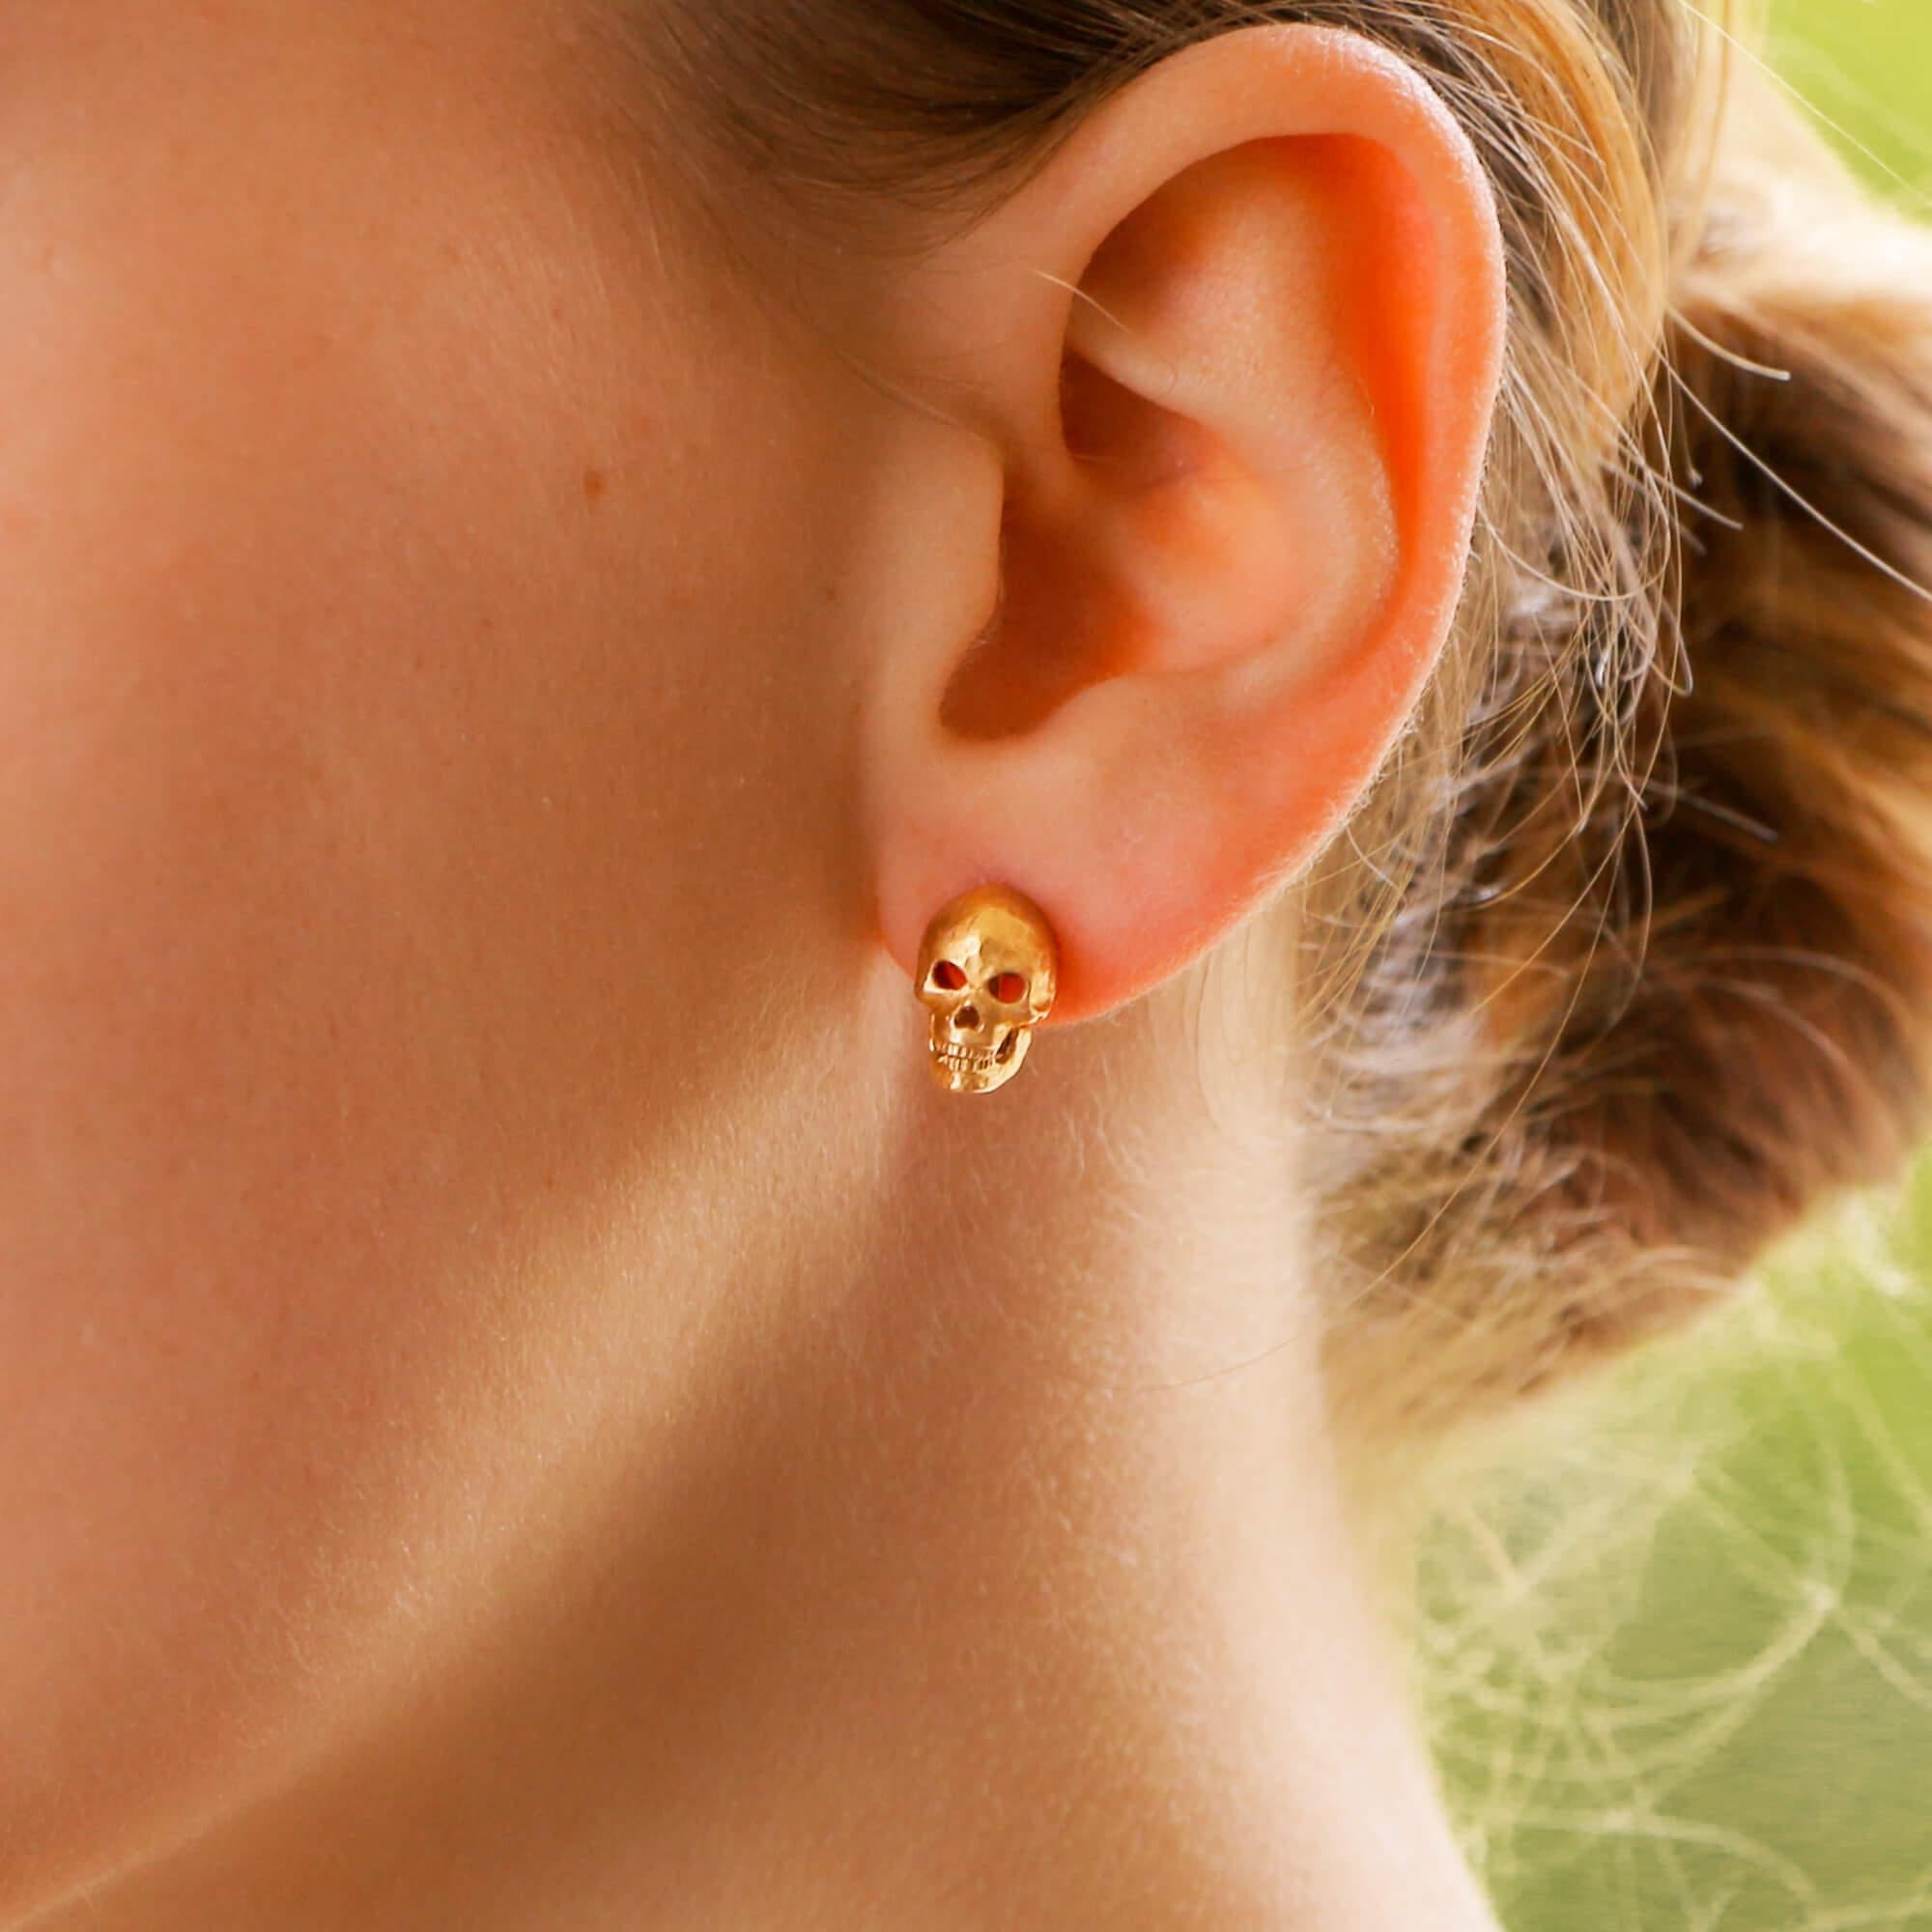 An extremely fun pair of diamond skull stud earrings set in 18 carat rose gold. What makes these earrings so unbelievably quirky is that each skull has a hinged mouth that opens and closes which subsequently causes the skulls diamond eyes to appear